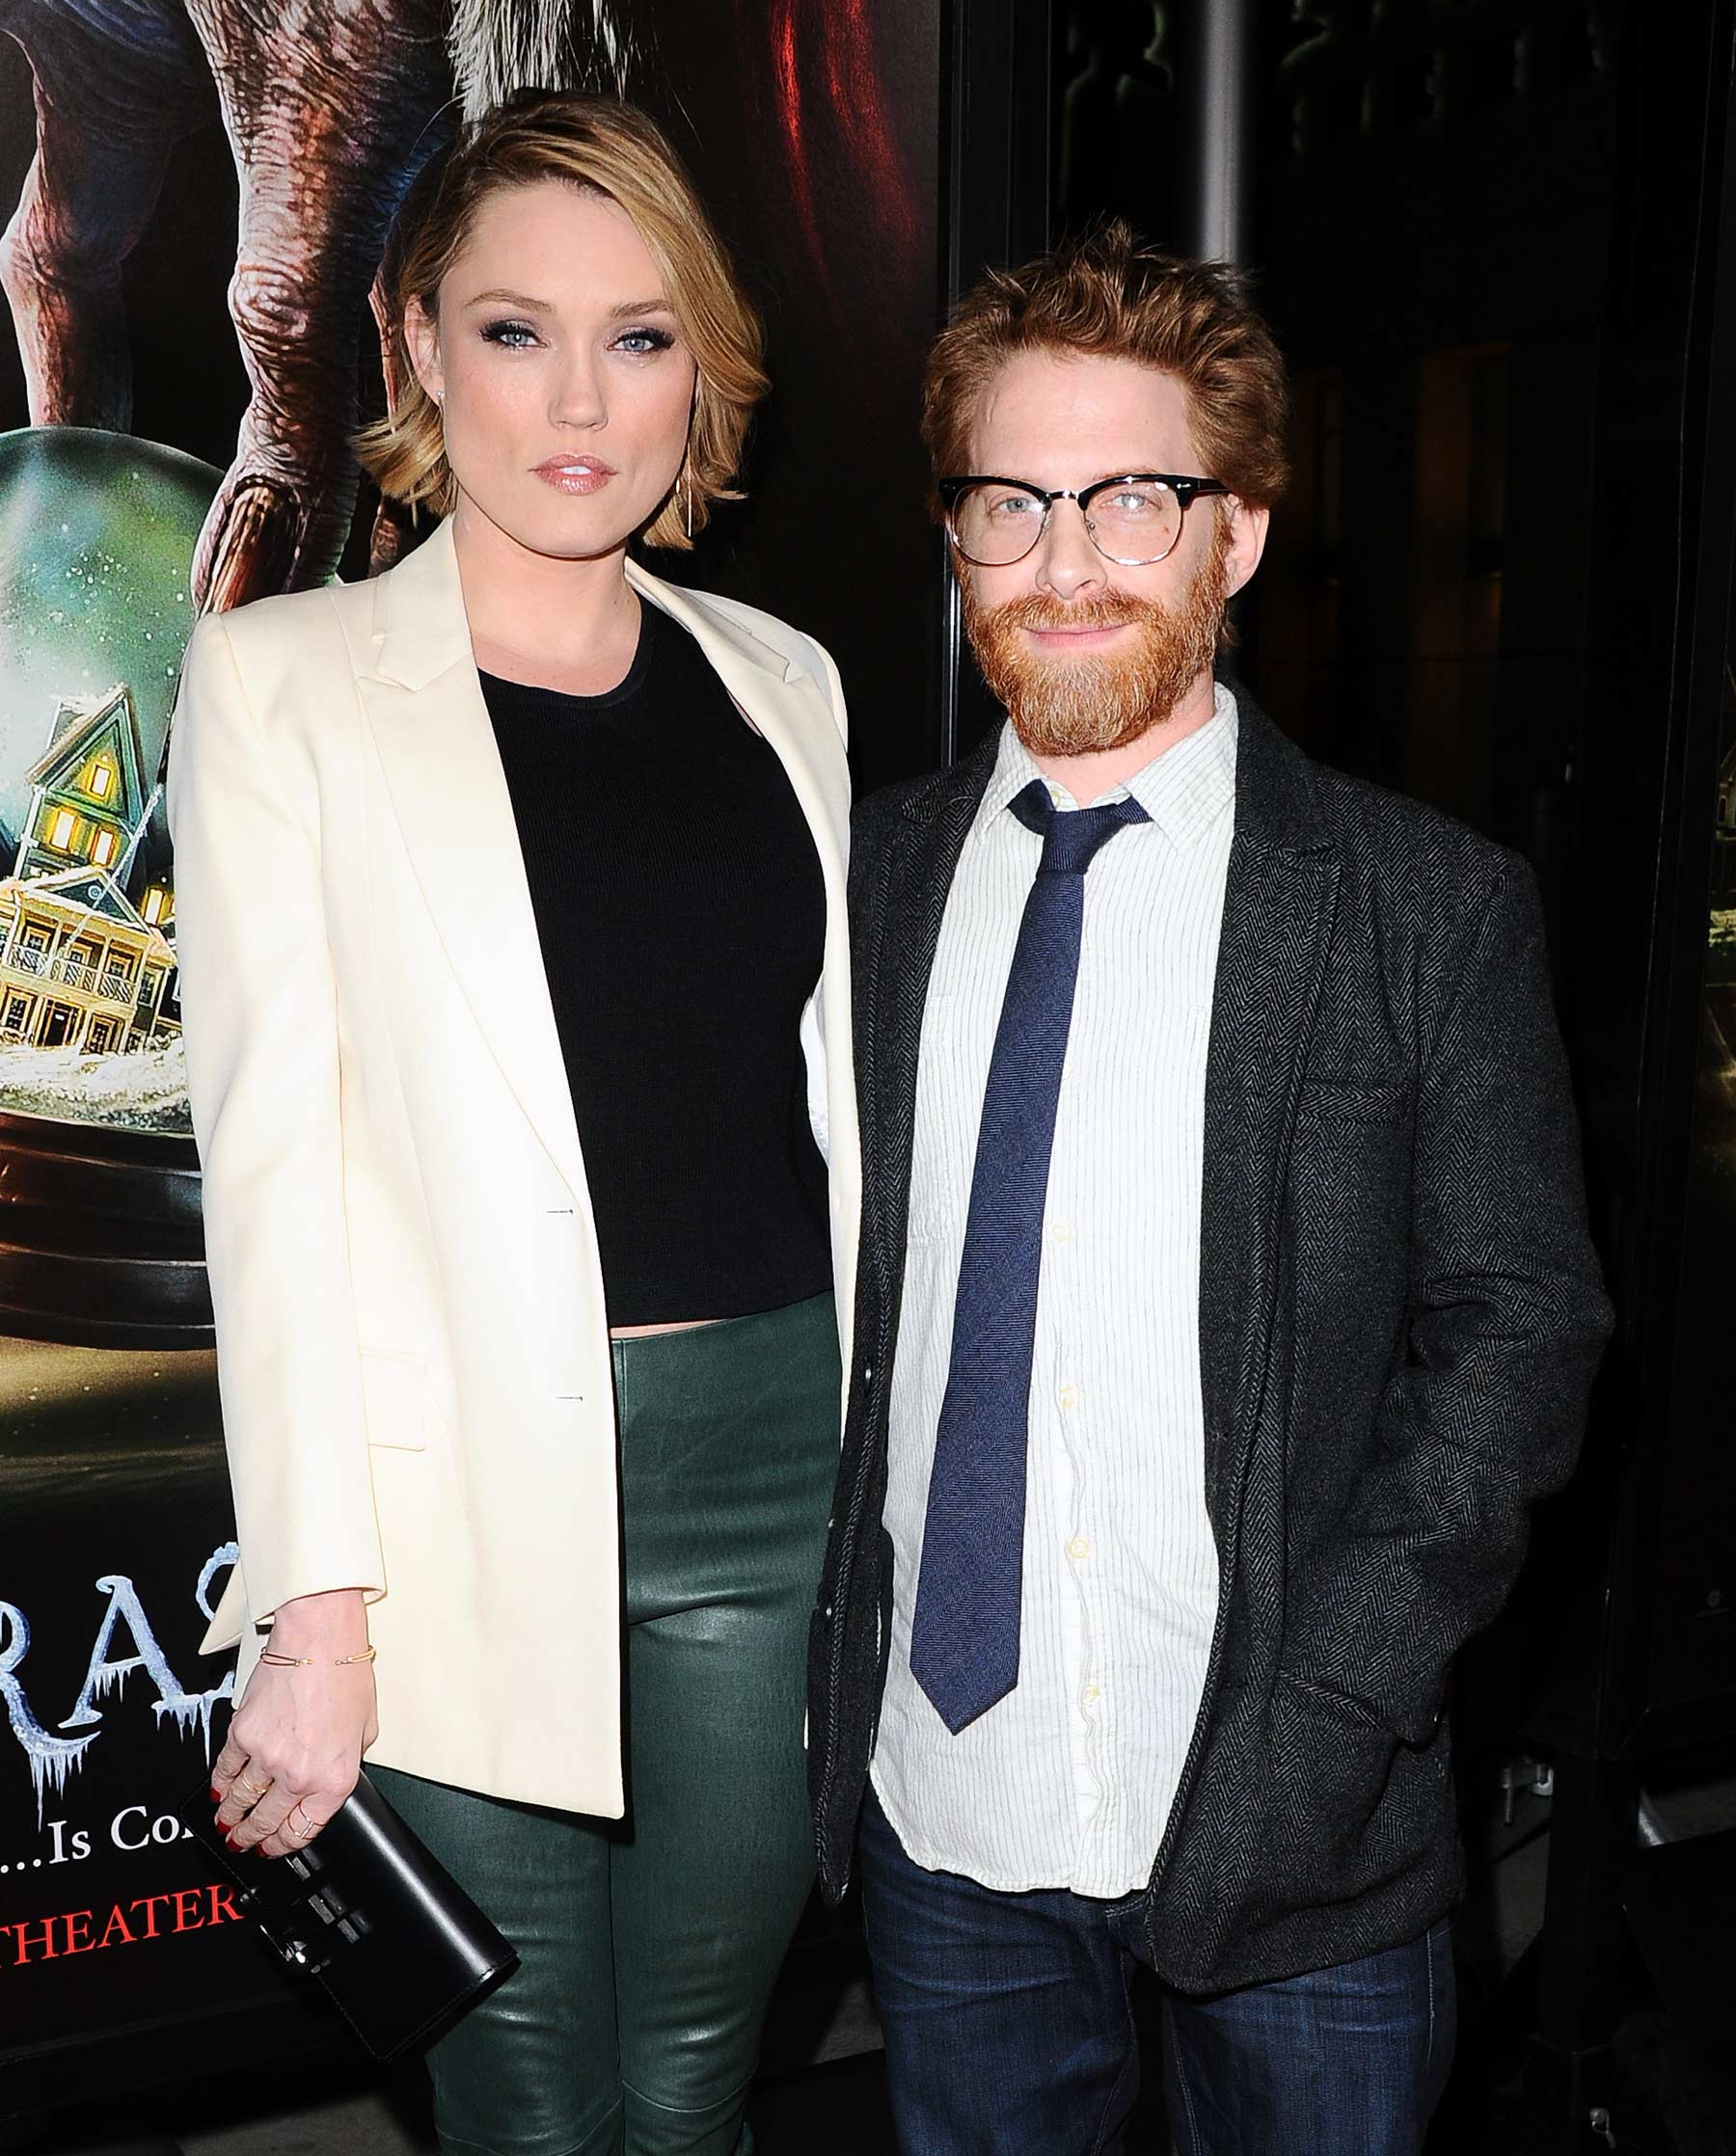 Clare Grant attends Screening of Universal Pictures Krampus